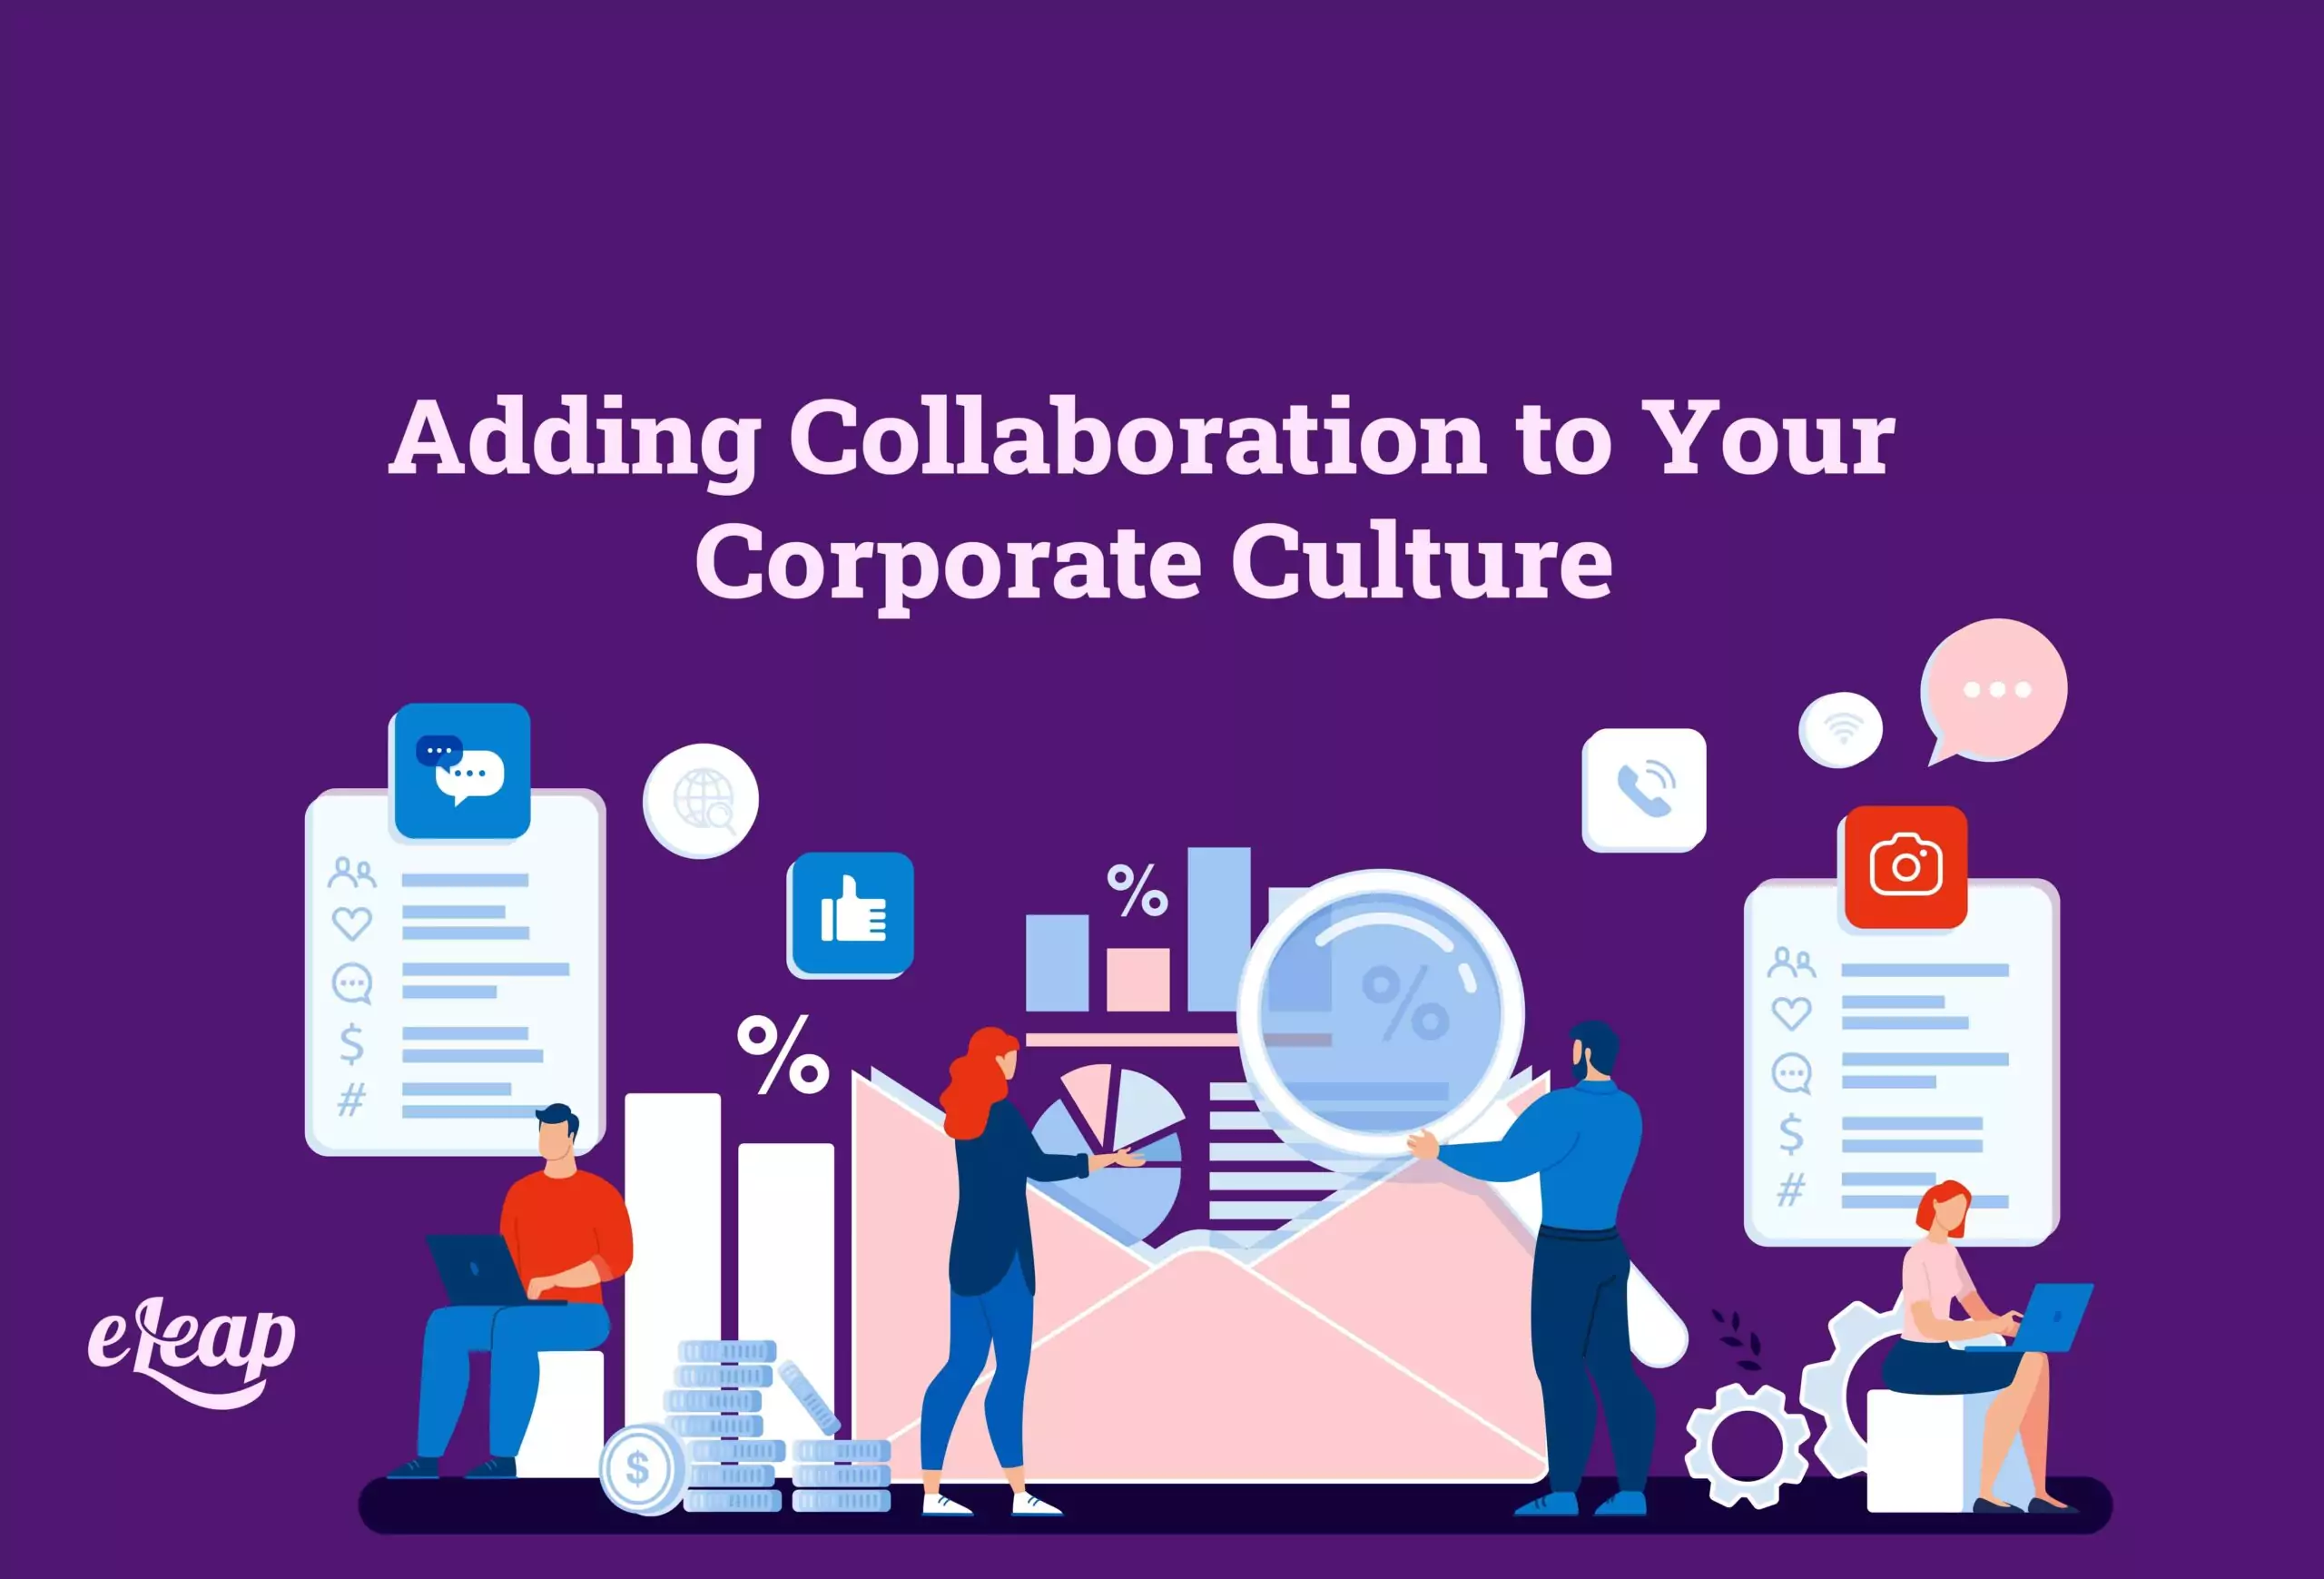 Adding Collaboration to Your Corporate Culture